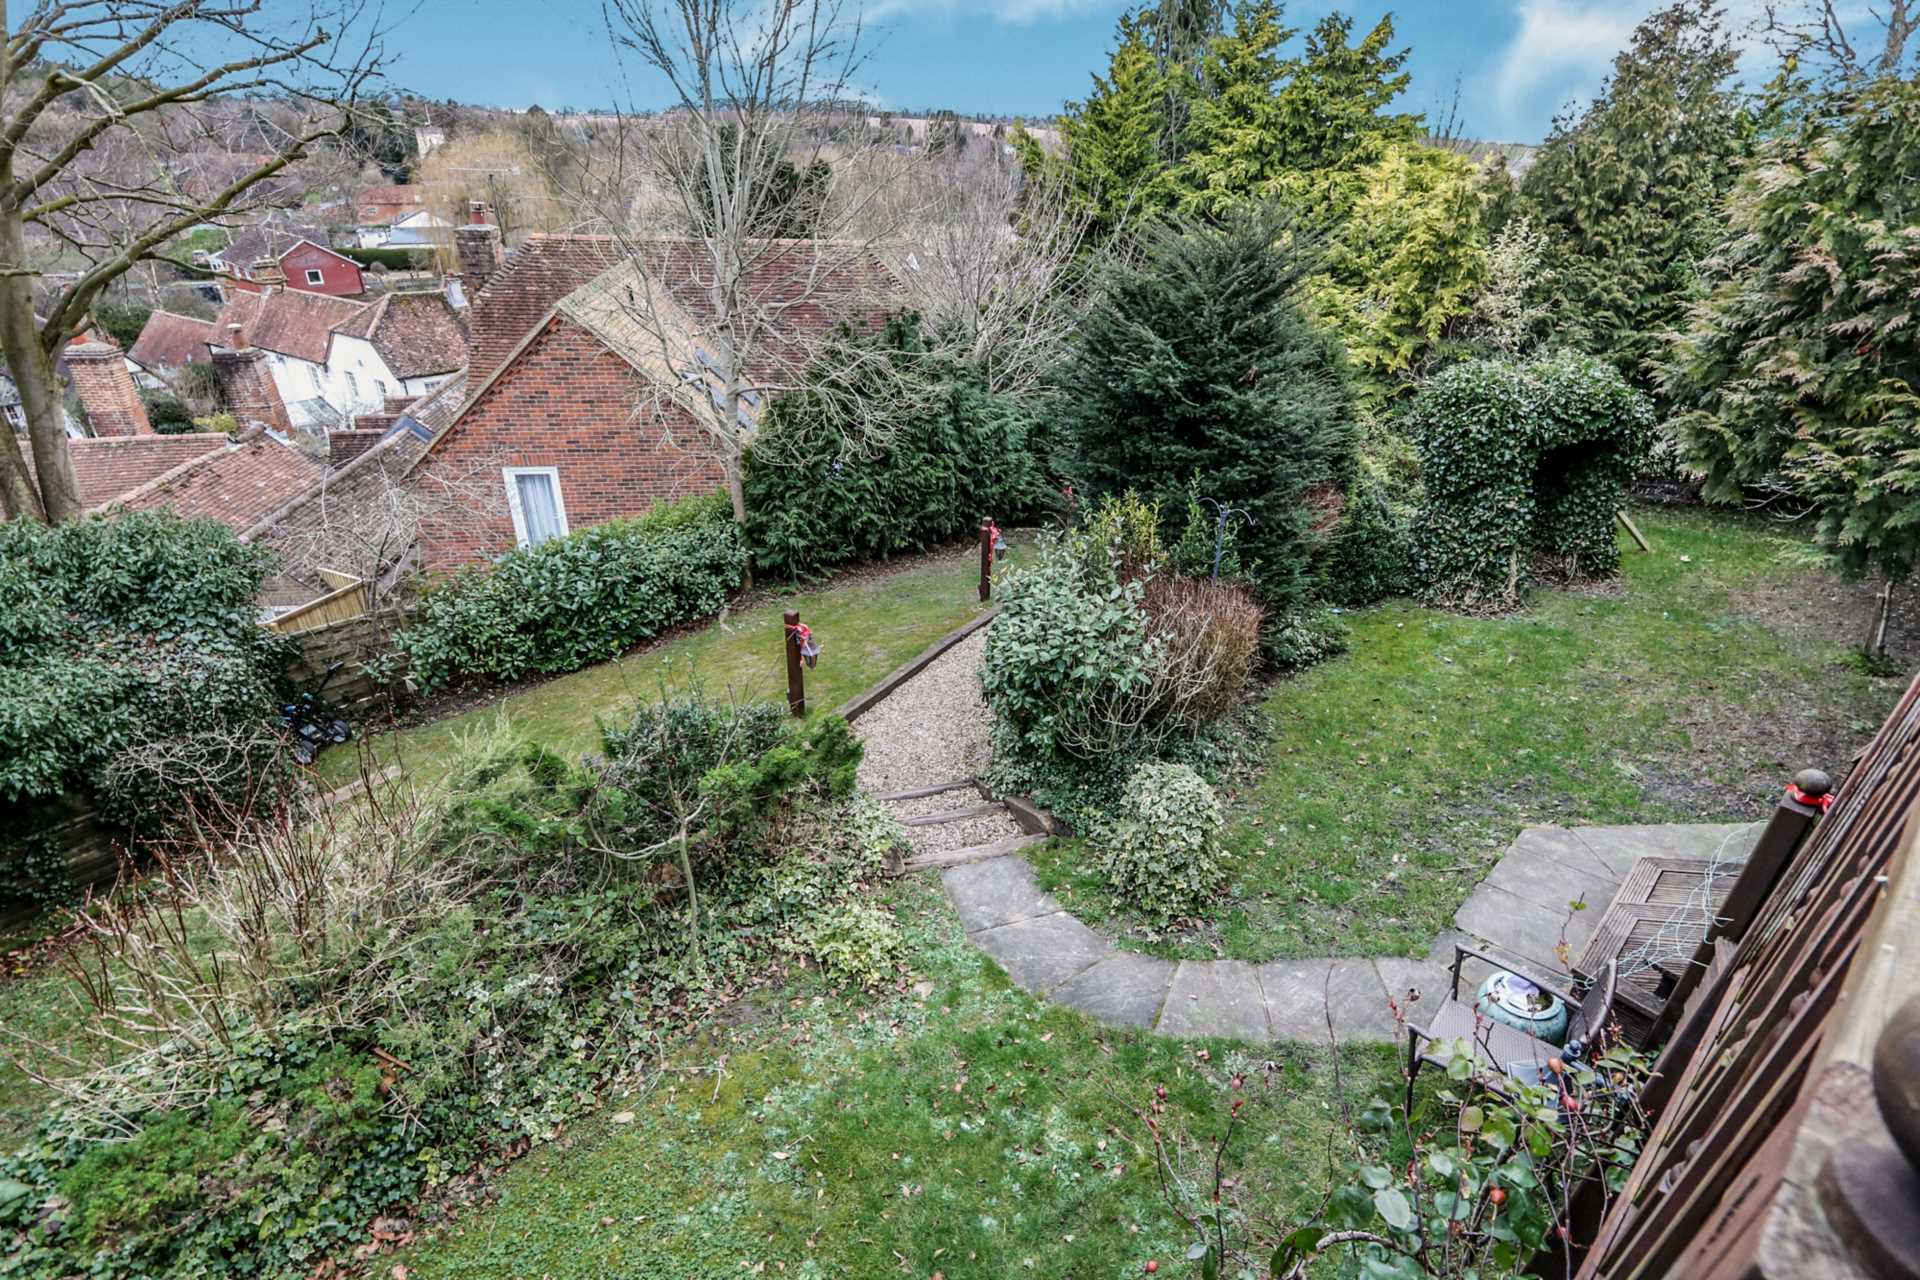 Forge Hill, Hampstead Norreys, Berkshire, Image 16